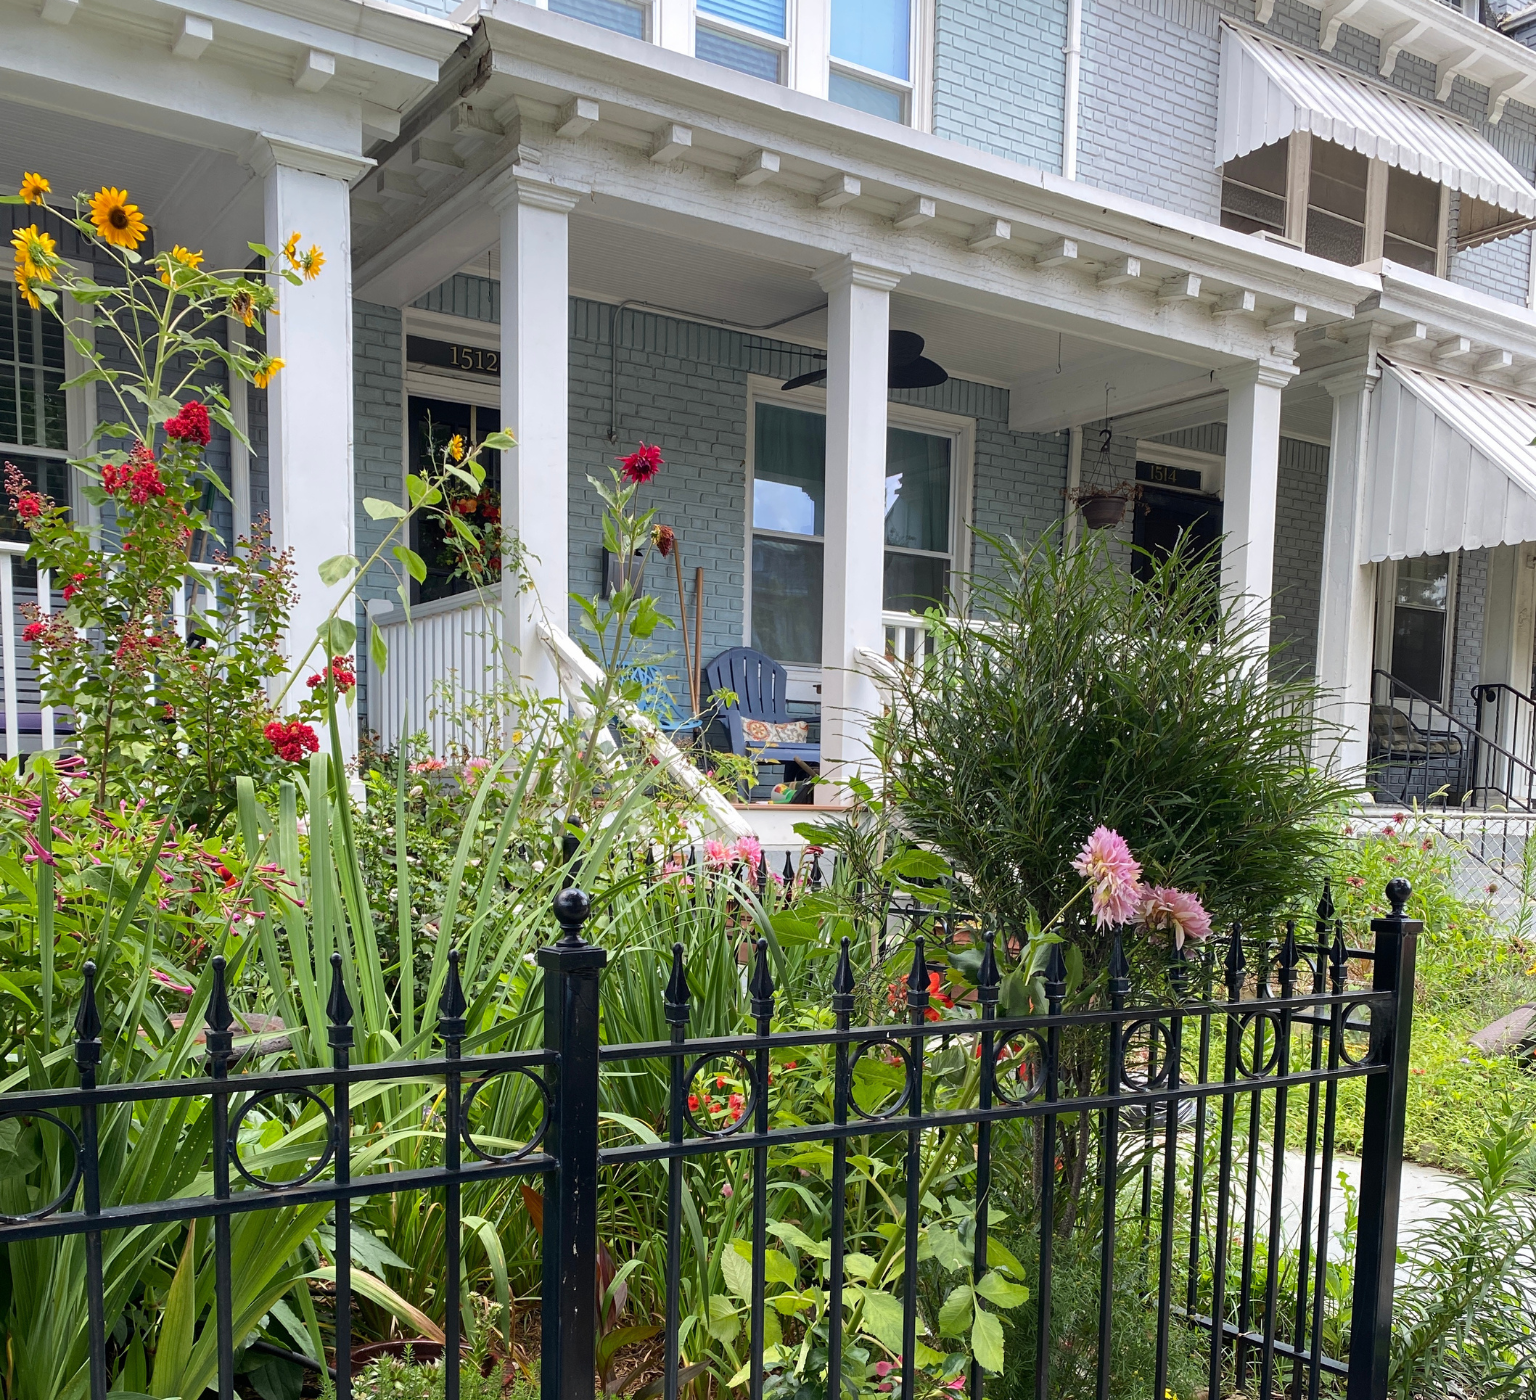 A historic home with summer garden in bloom in Kingman Park, Washington, DC. Wilcox Electric DC.